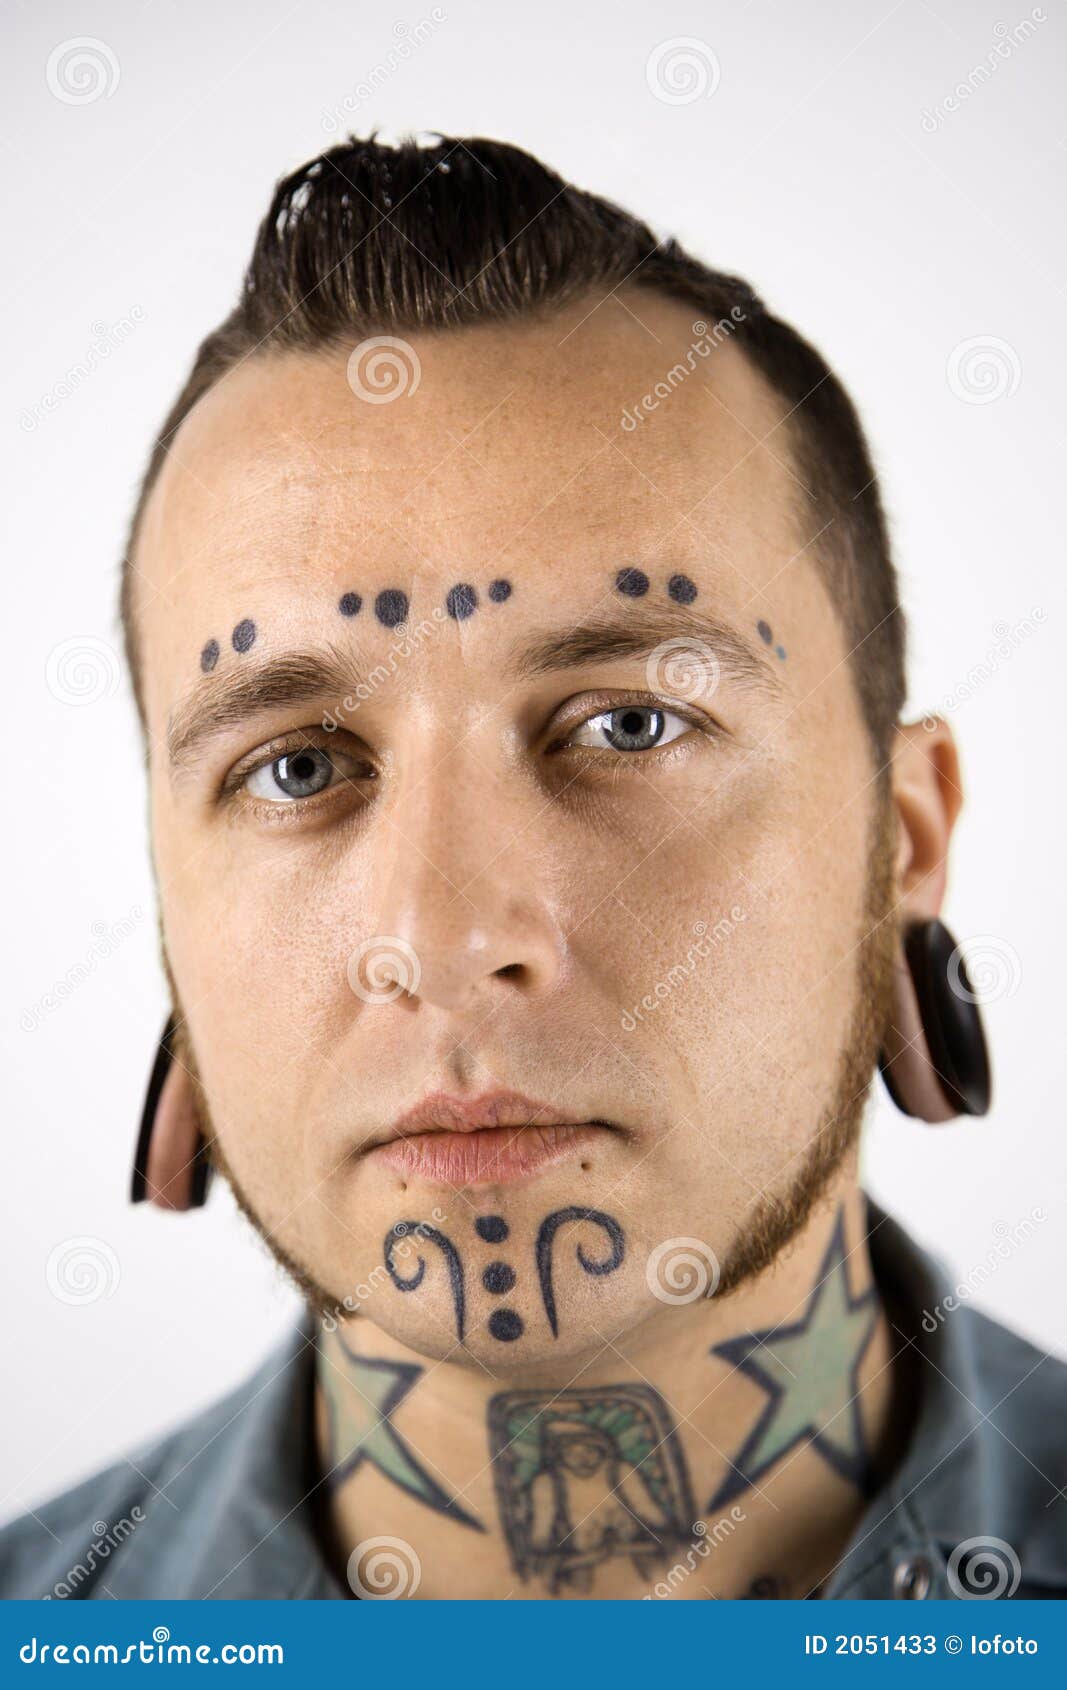 630 Tattoo Pierced Men Youth Culture Stock Photos Pictures  RoyaltyFree  Images  iStock